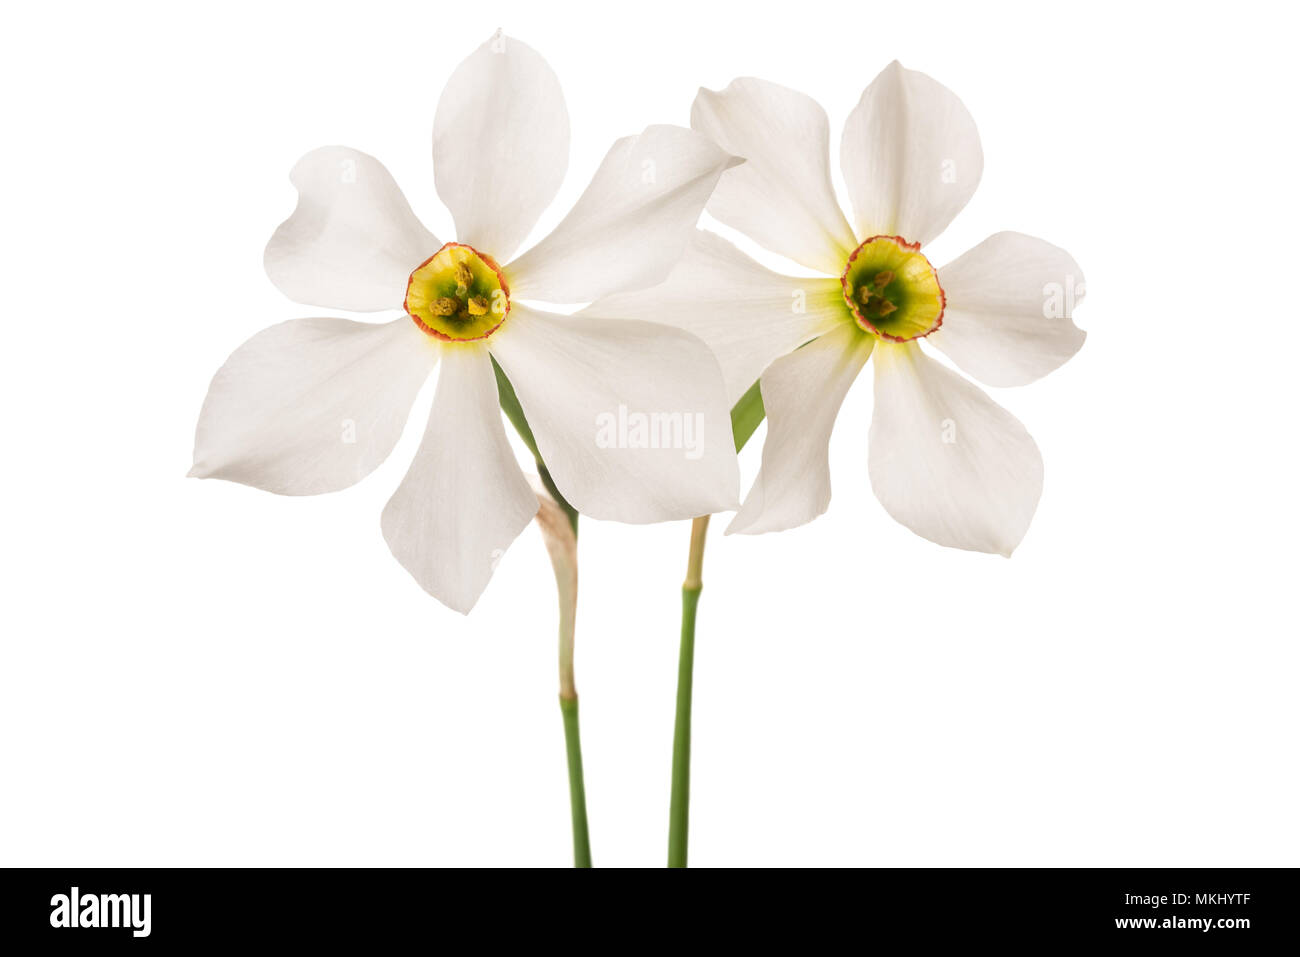 White daffodils (Narcissus poeticus) isolated on white background Stock Photo